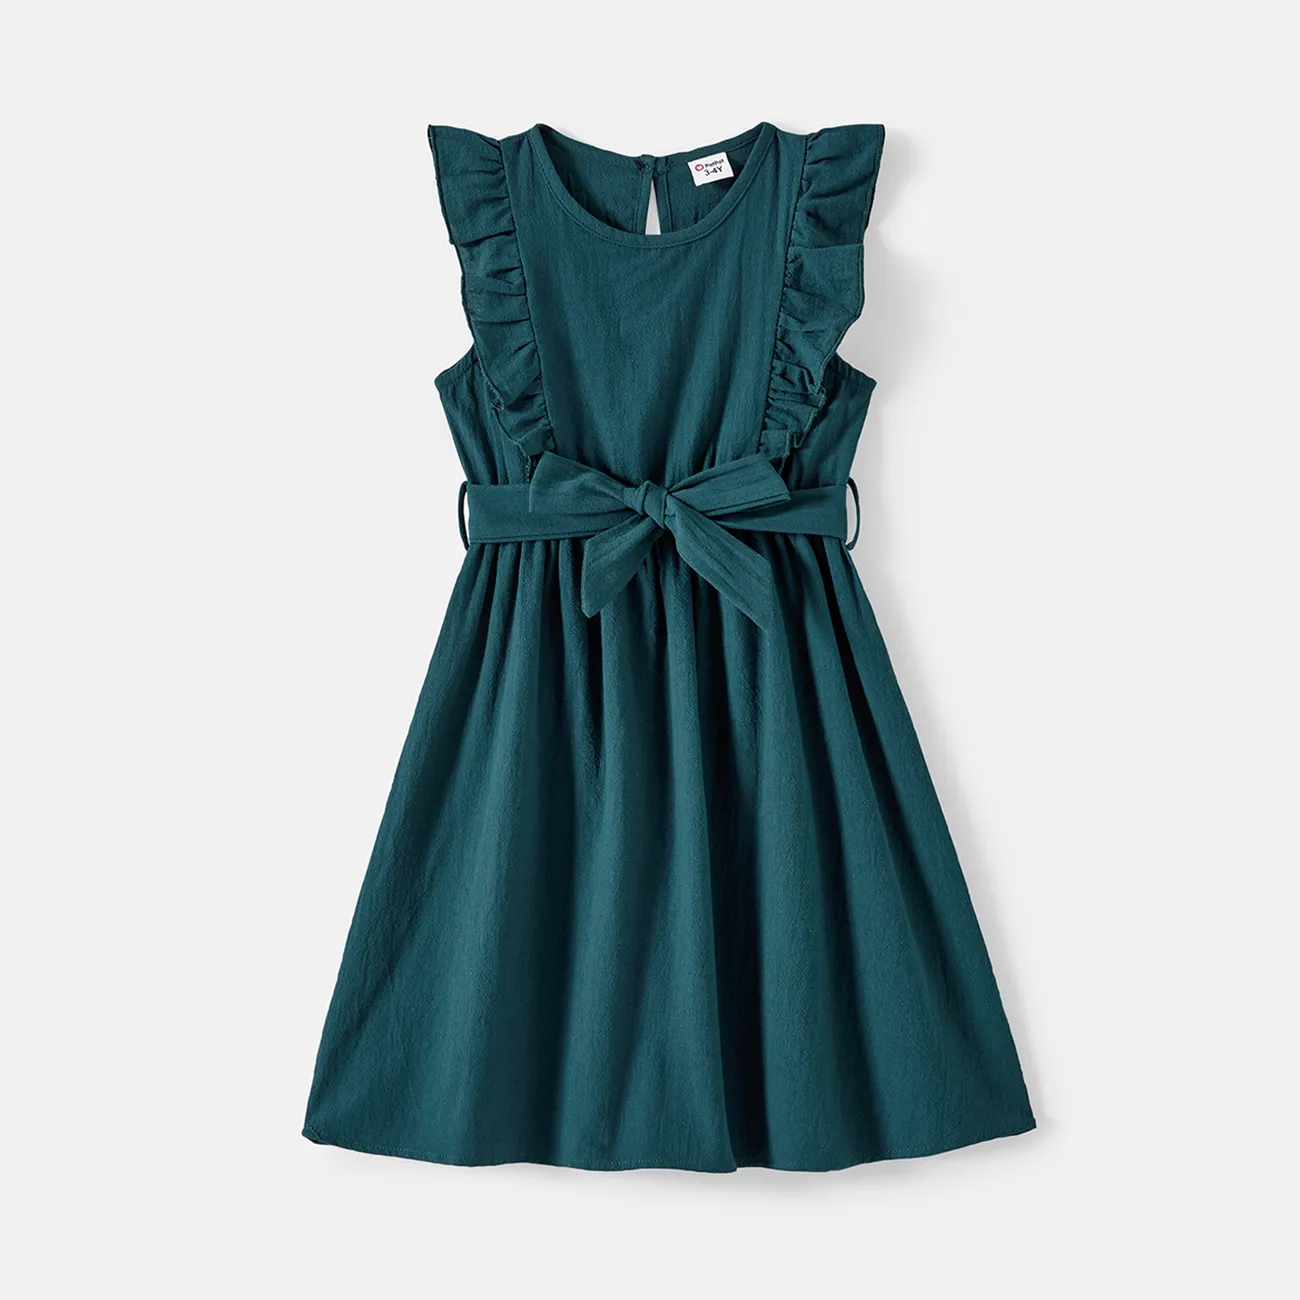 Family Matching Solid Knot Front Cami Dresses and Colorblock Short-sleeve Tee Sets Green* big image 1